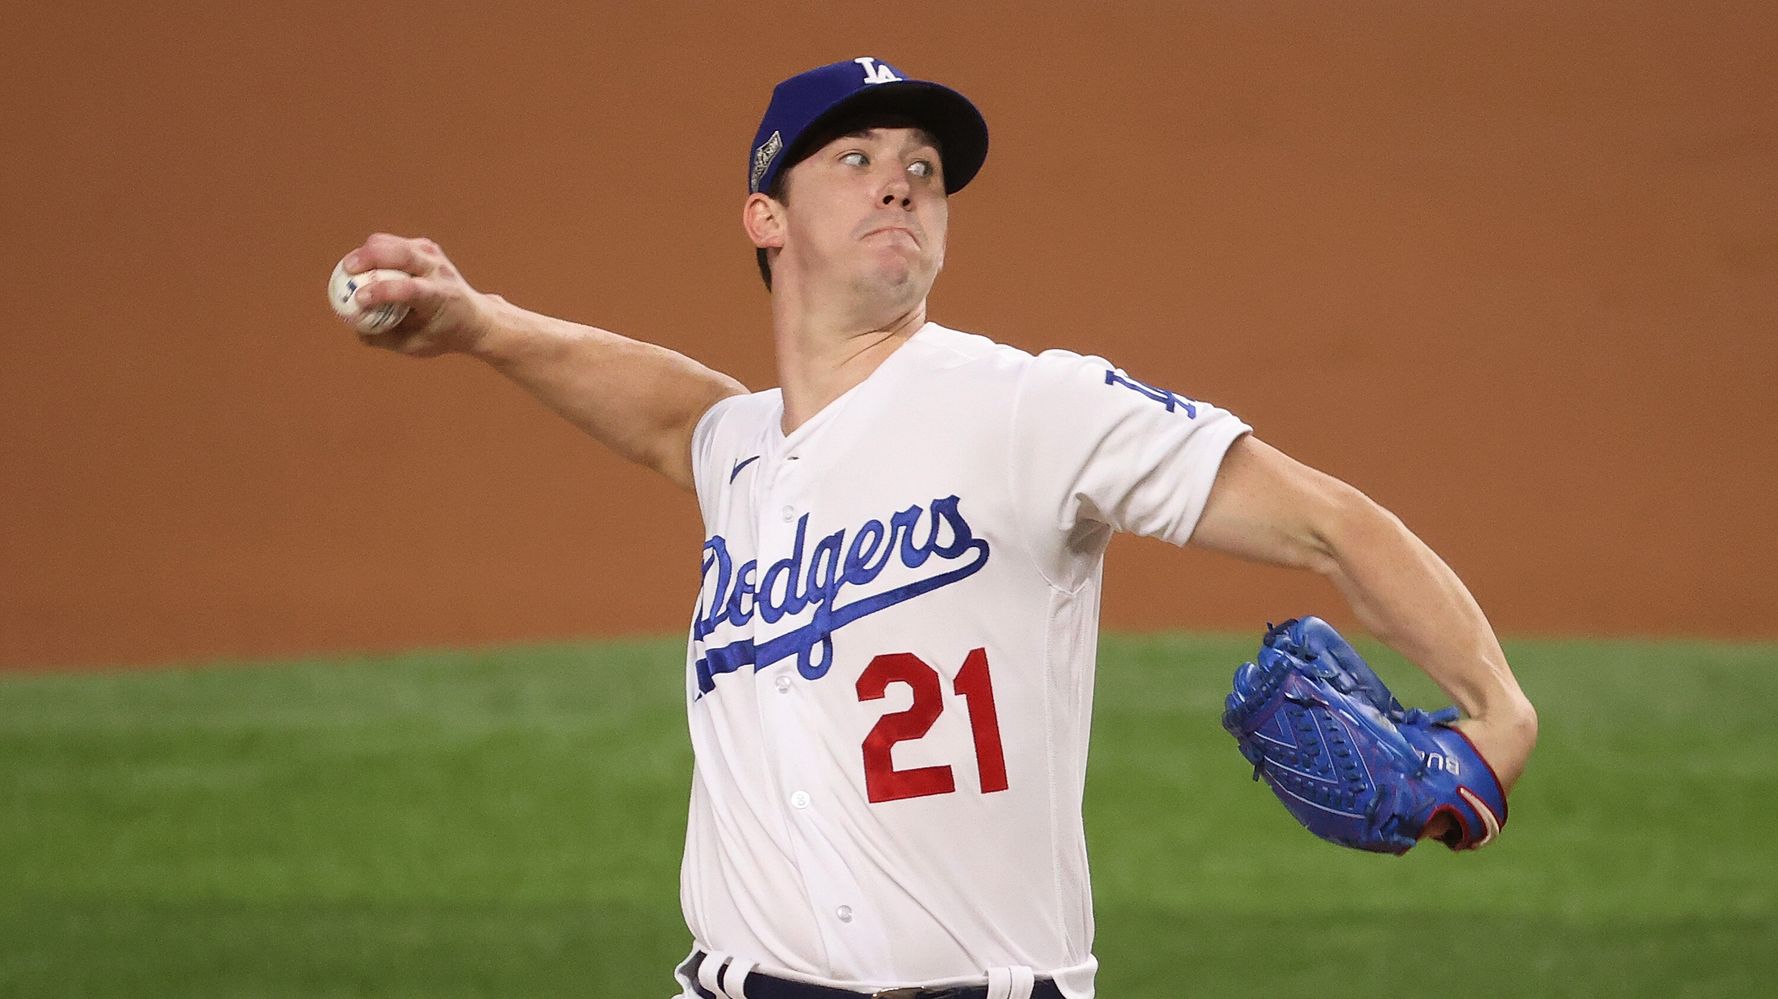 Walker Buehler's Tight Pants Are The Talk Of The Night On Twitter